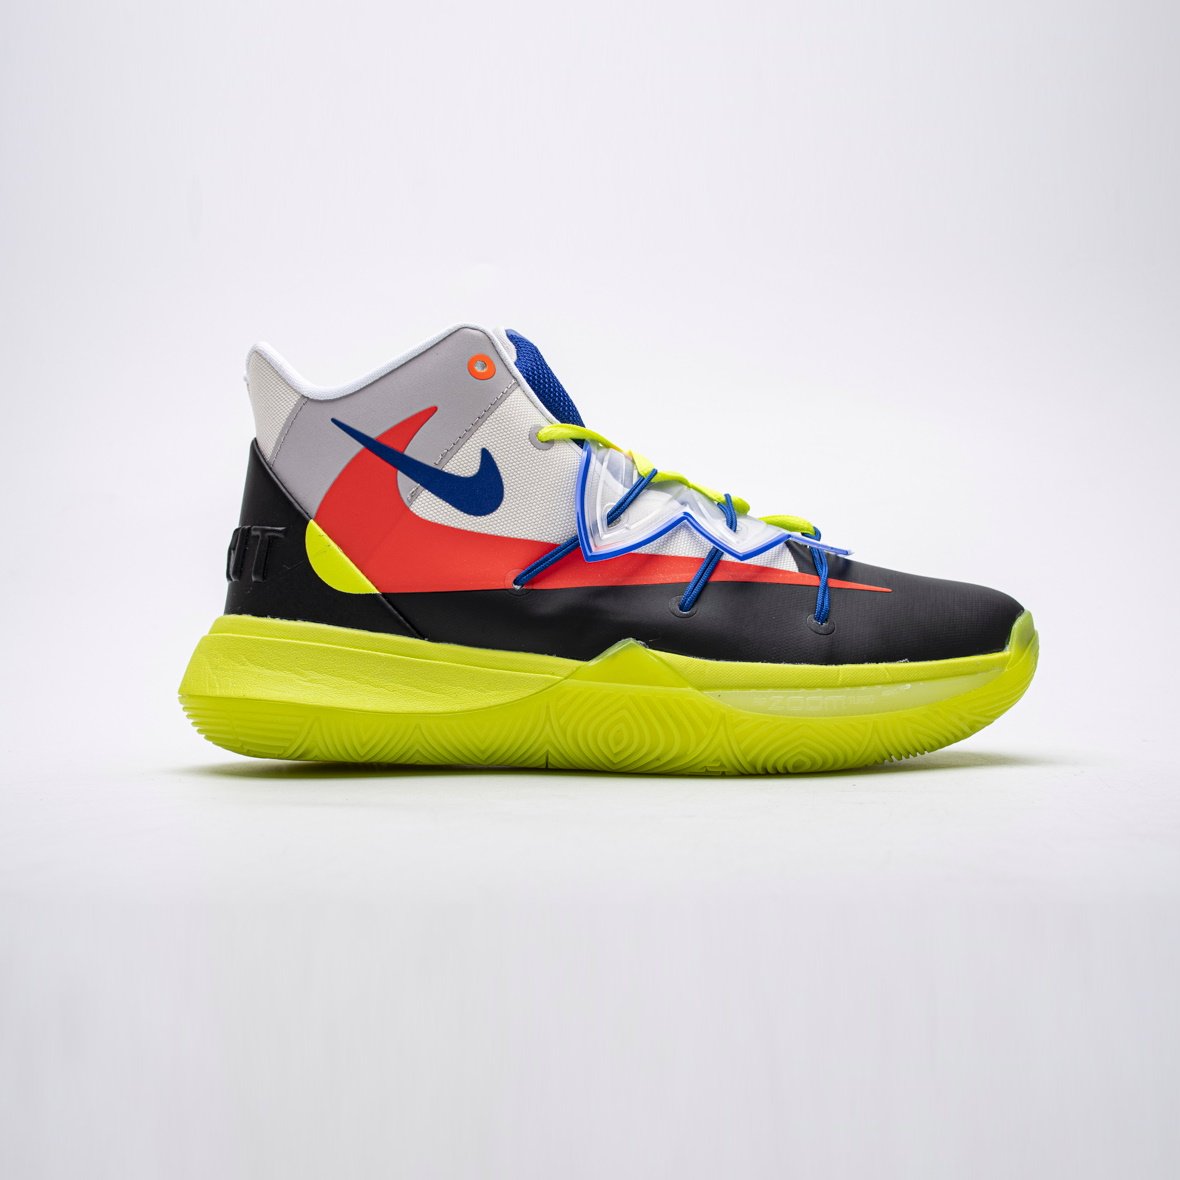 N*ke Max Kyrie 5 Concepts TV Yellow Red Sneakers